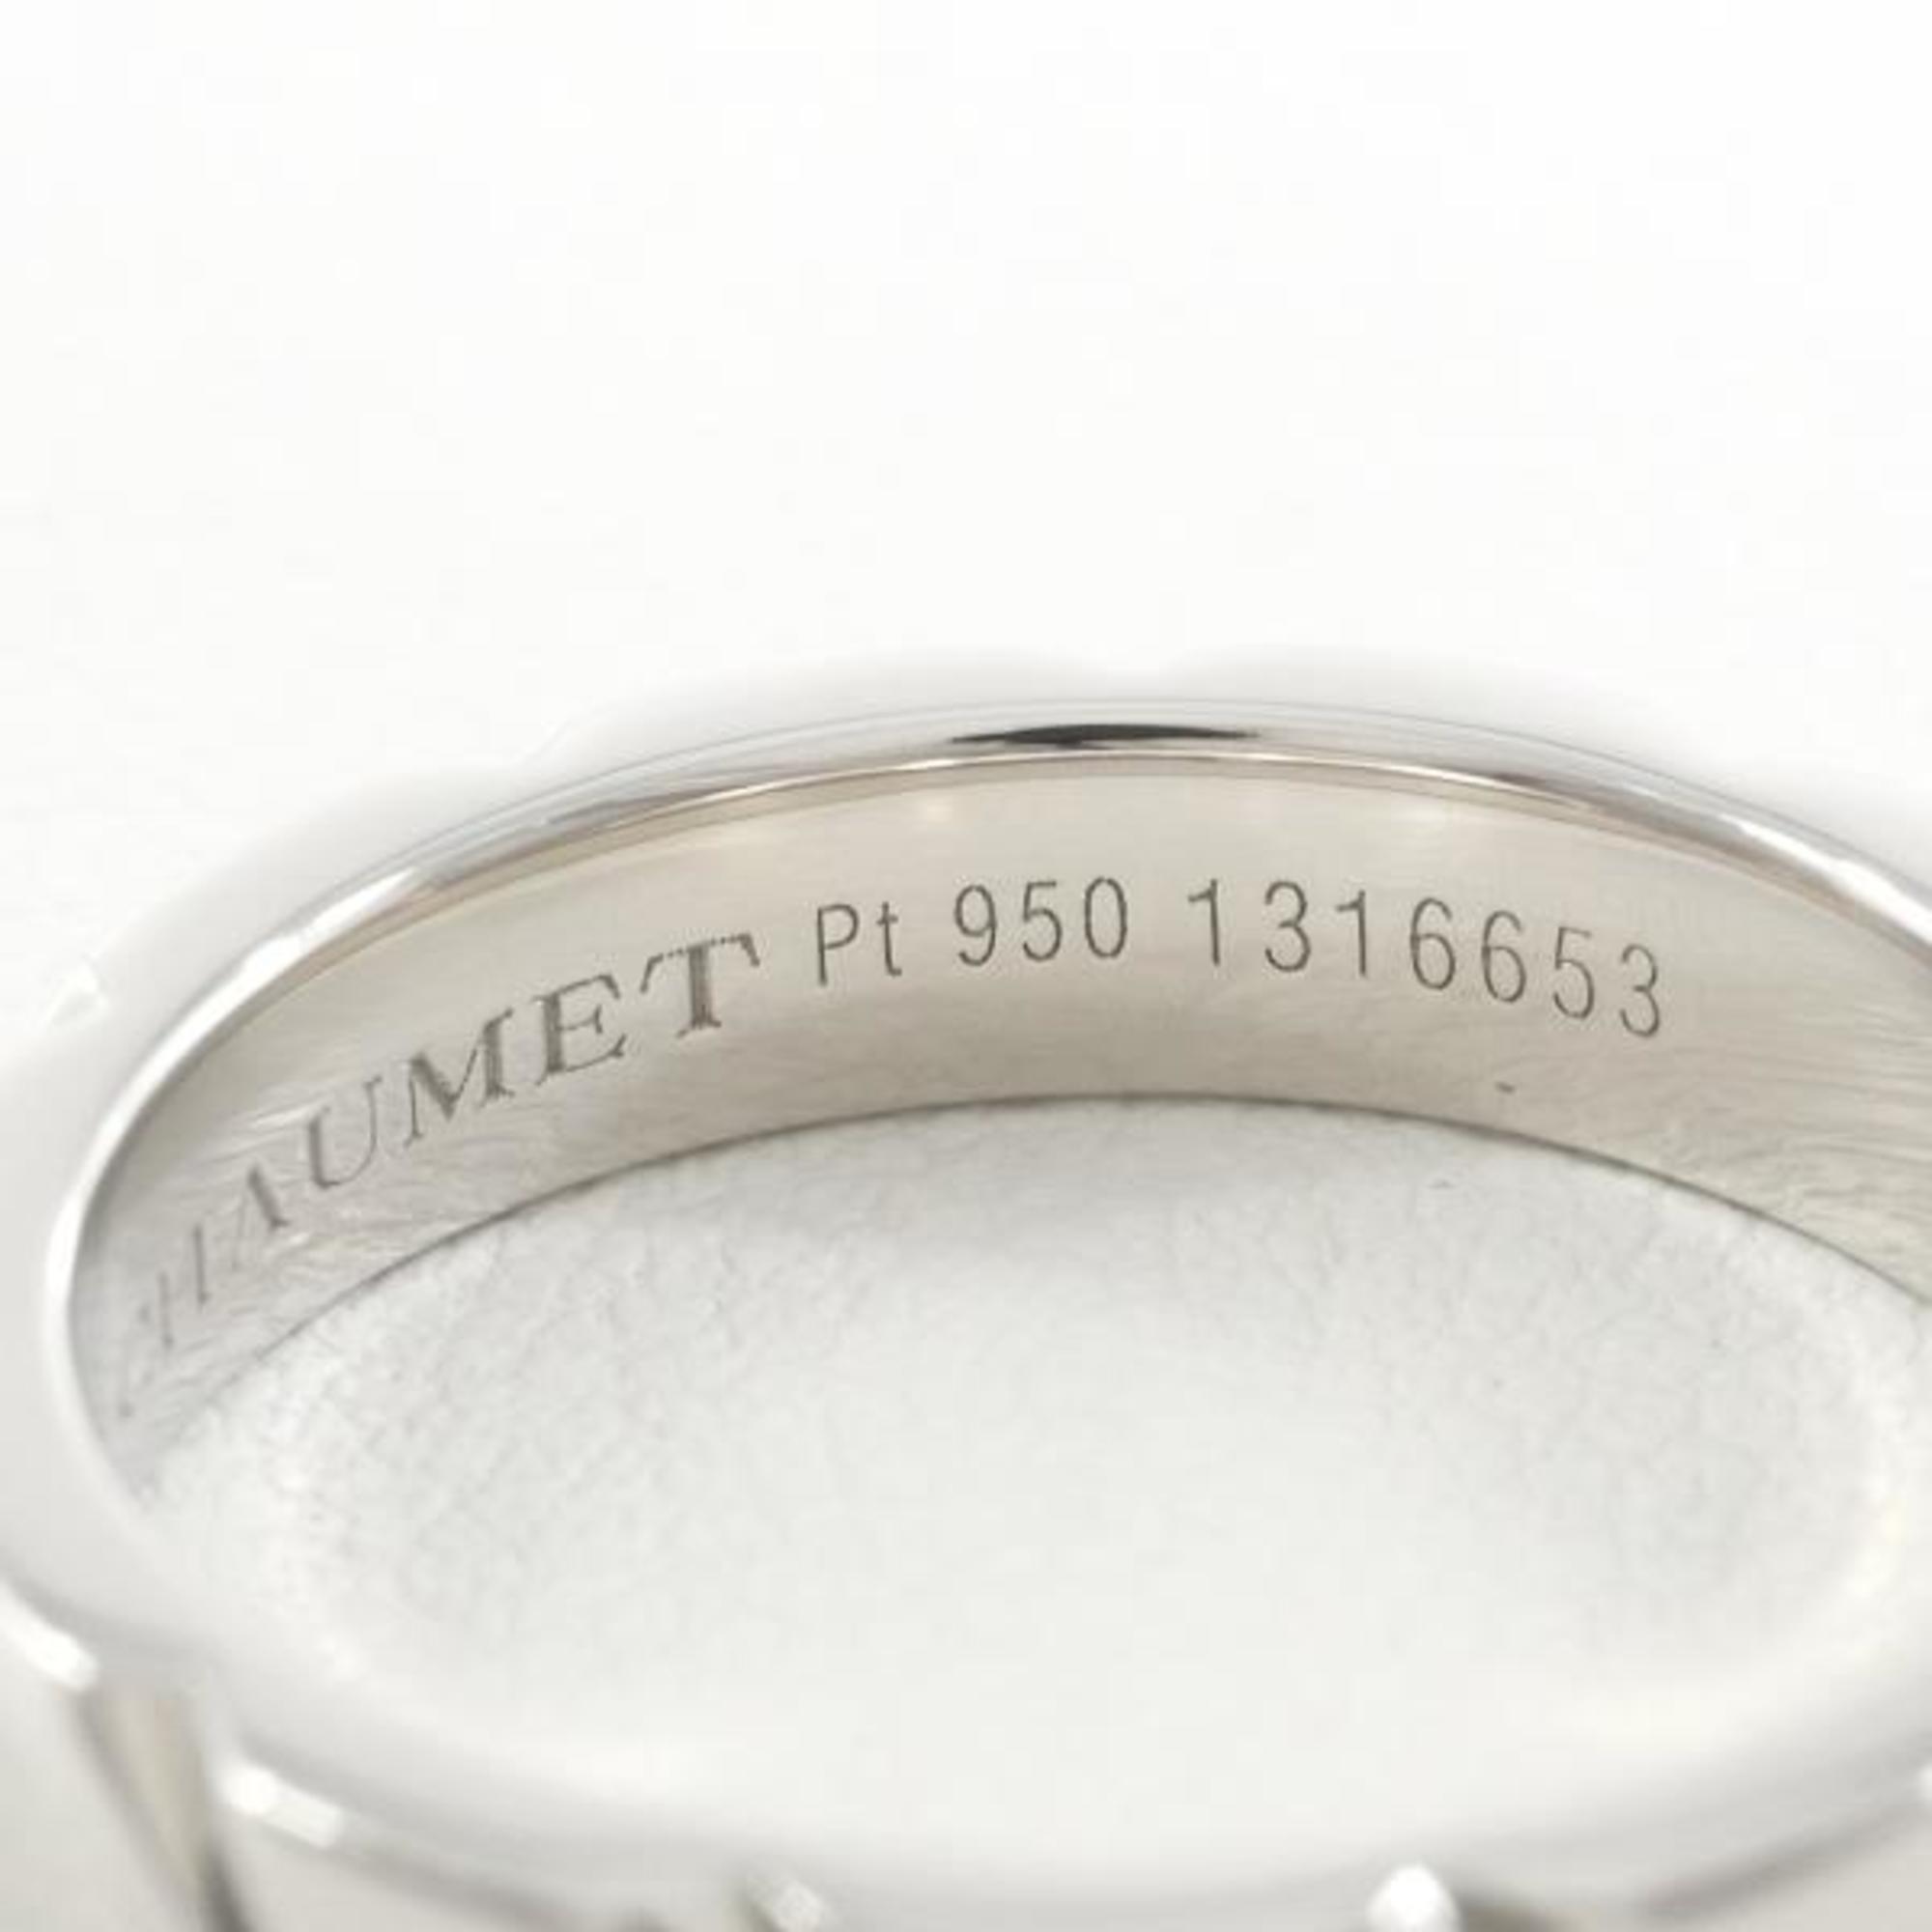 Chaumet PT950 Ring Total Weight Approx. 7.8g Jewelry